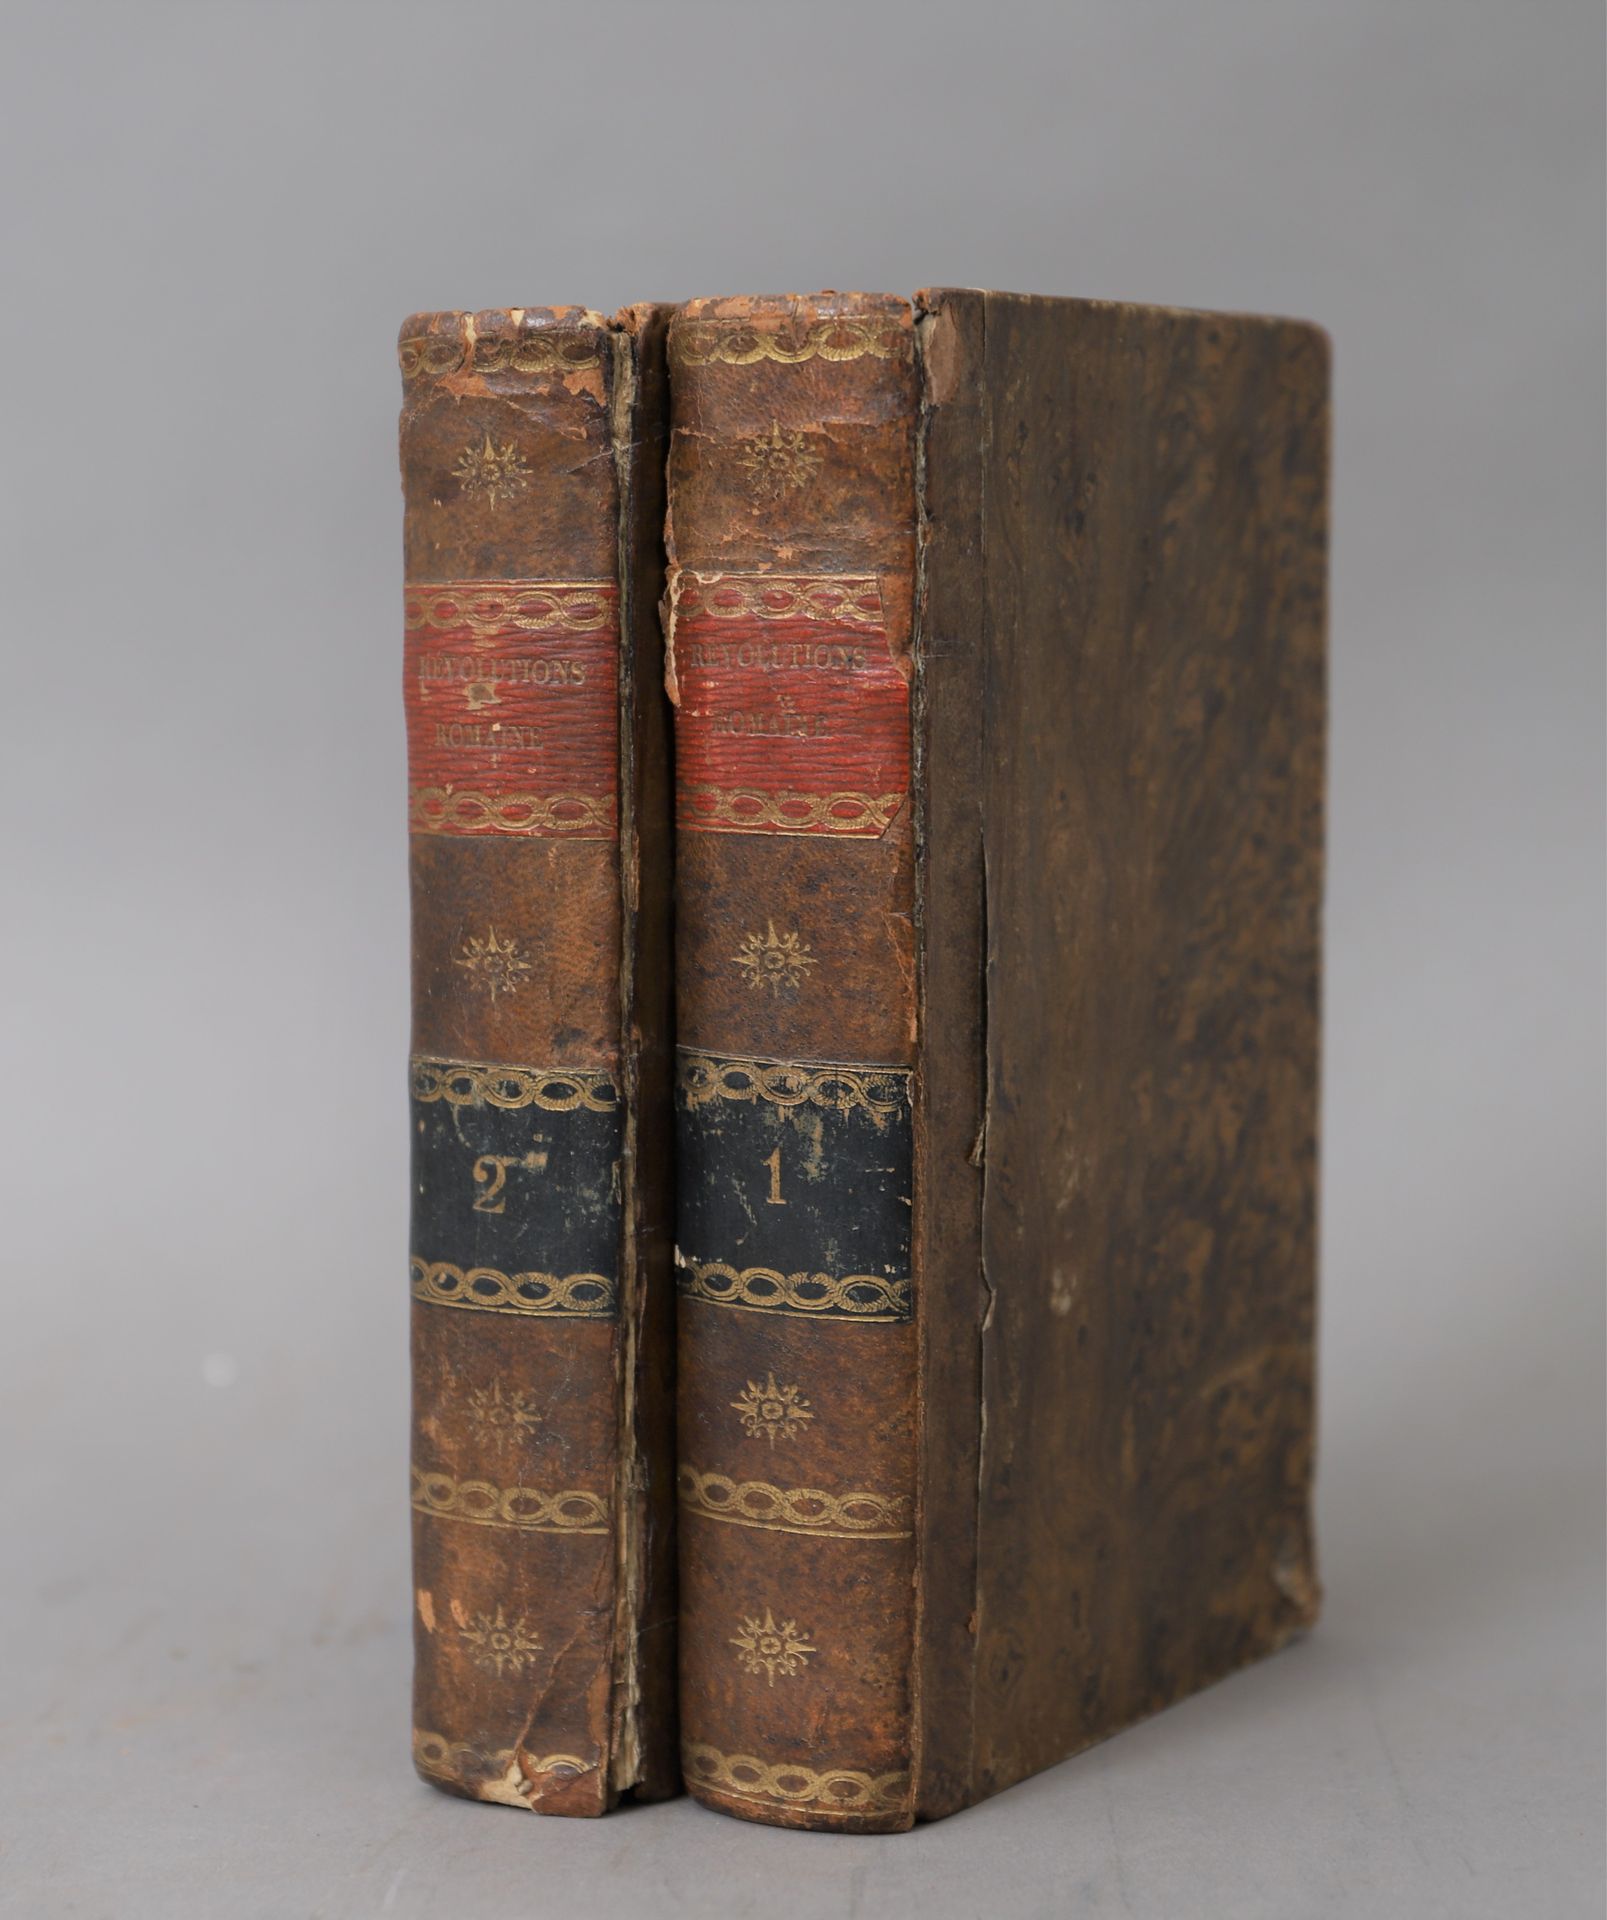 Null HISTORY of the ROMAN REVOLUTIONS

1810

2 bound volumes.